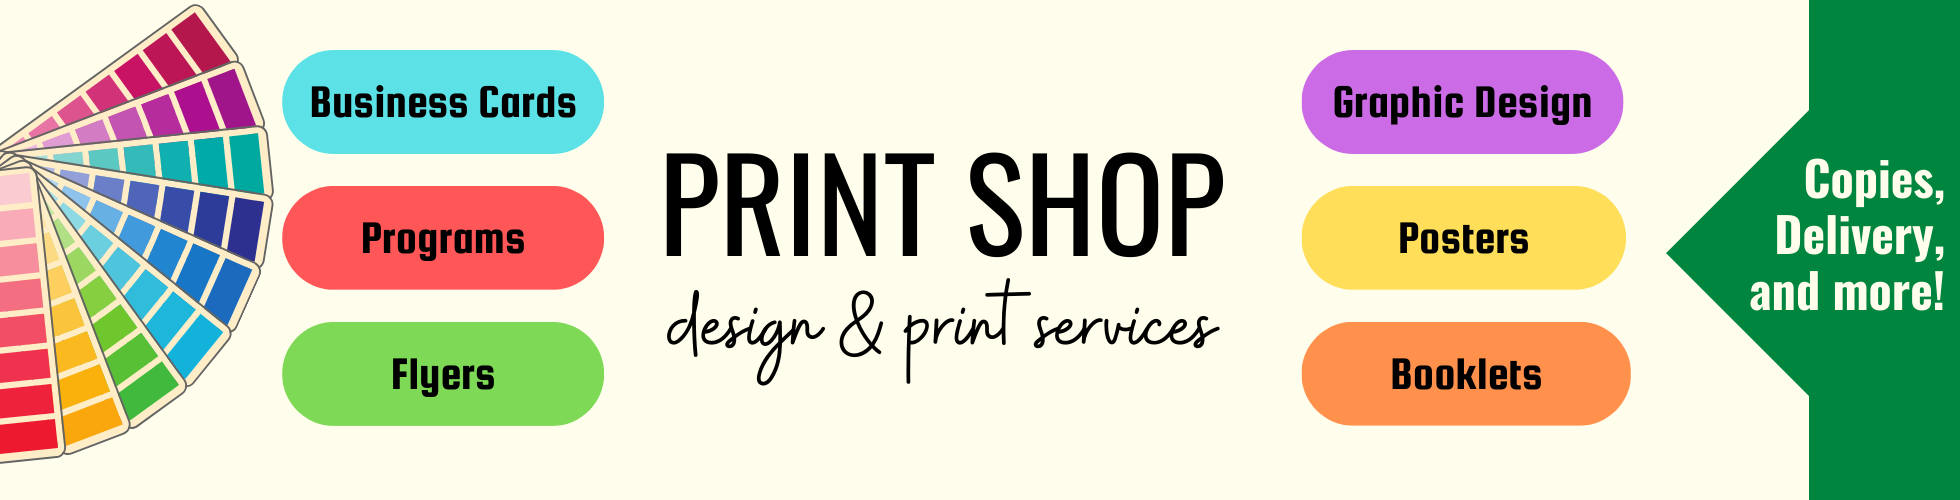 Print Shop - Design and Print Services graphic